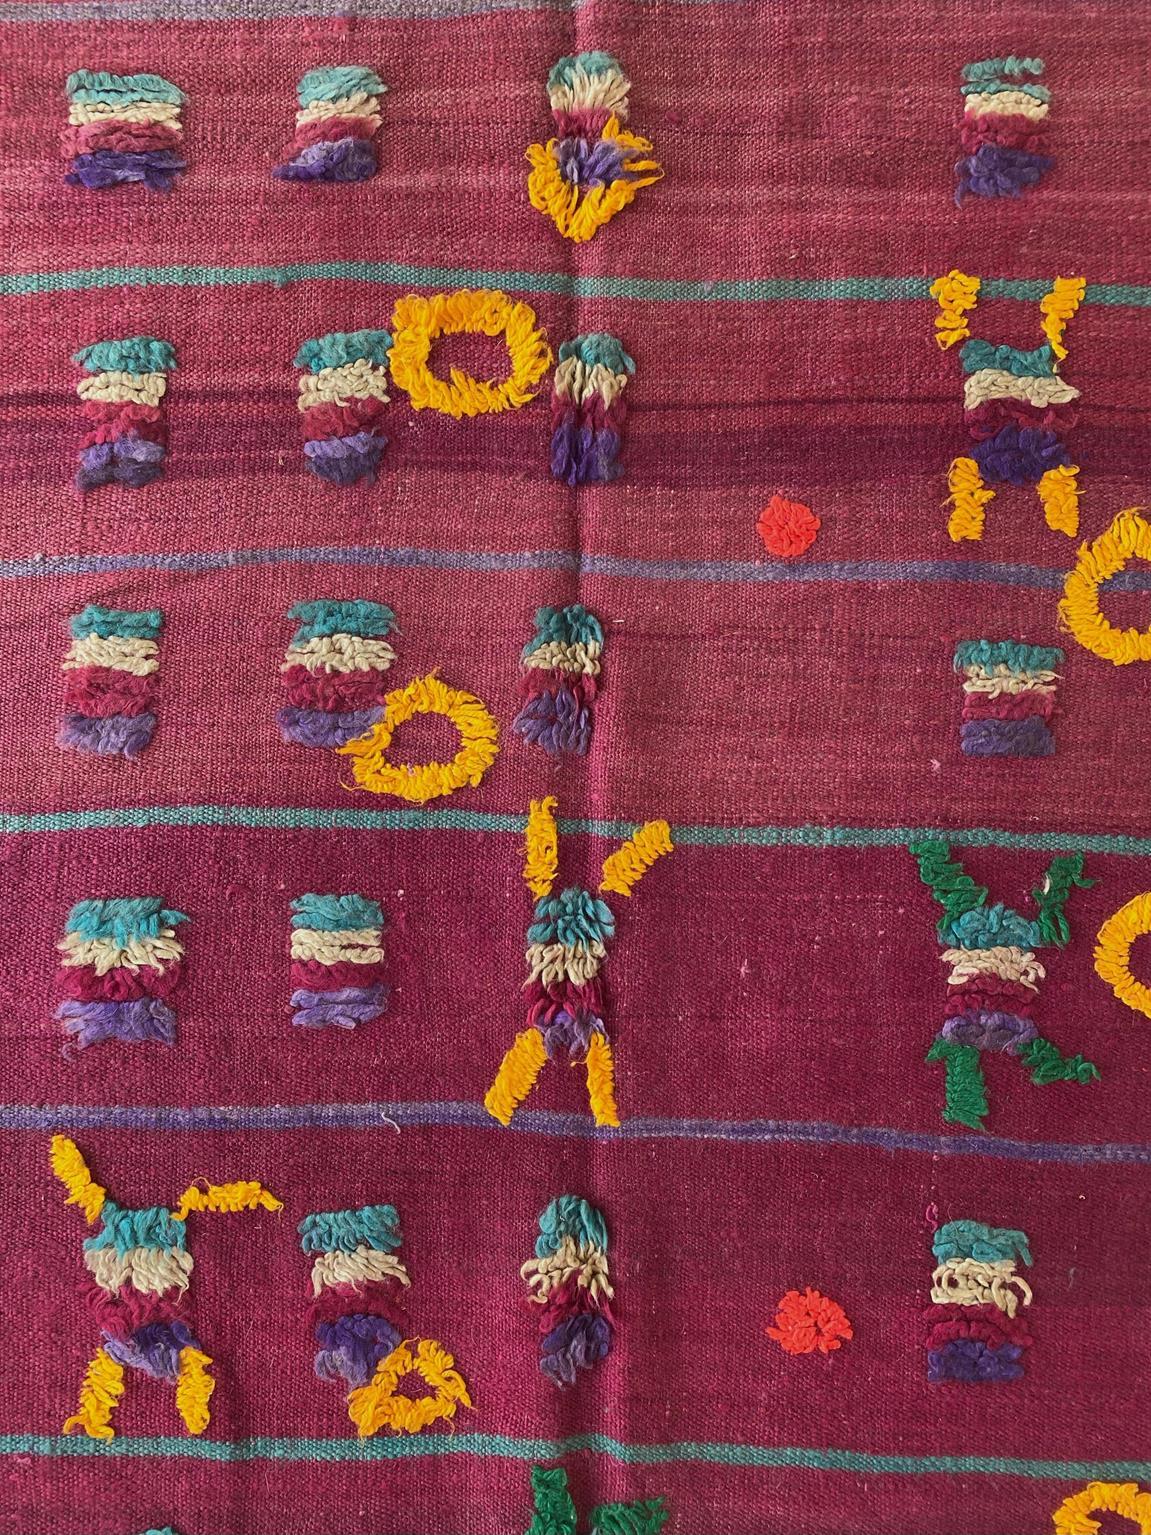 Vintage Moroccan Kilim textile - Purple and yellow - 4.1x8.3feet / 127x252cm For Sale 3